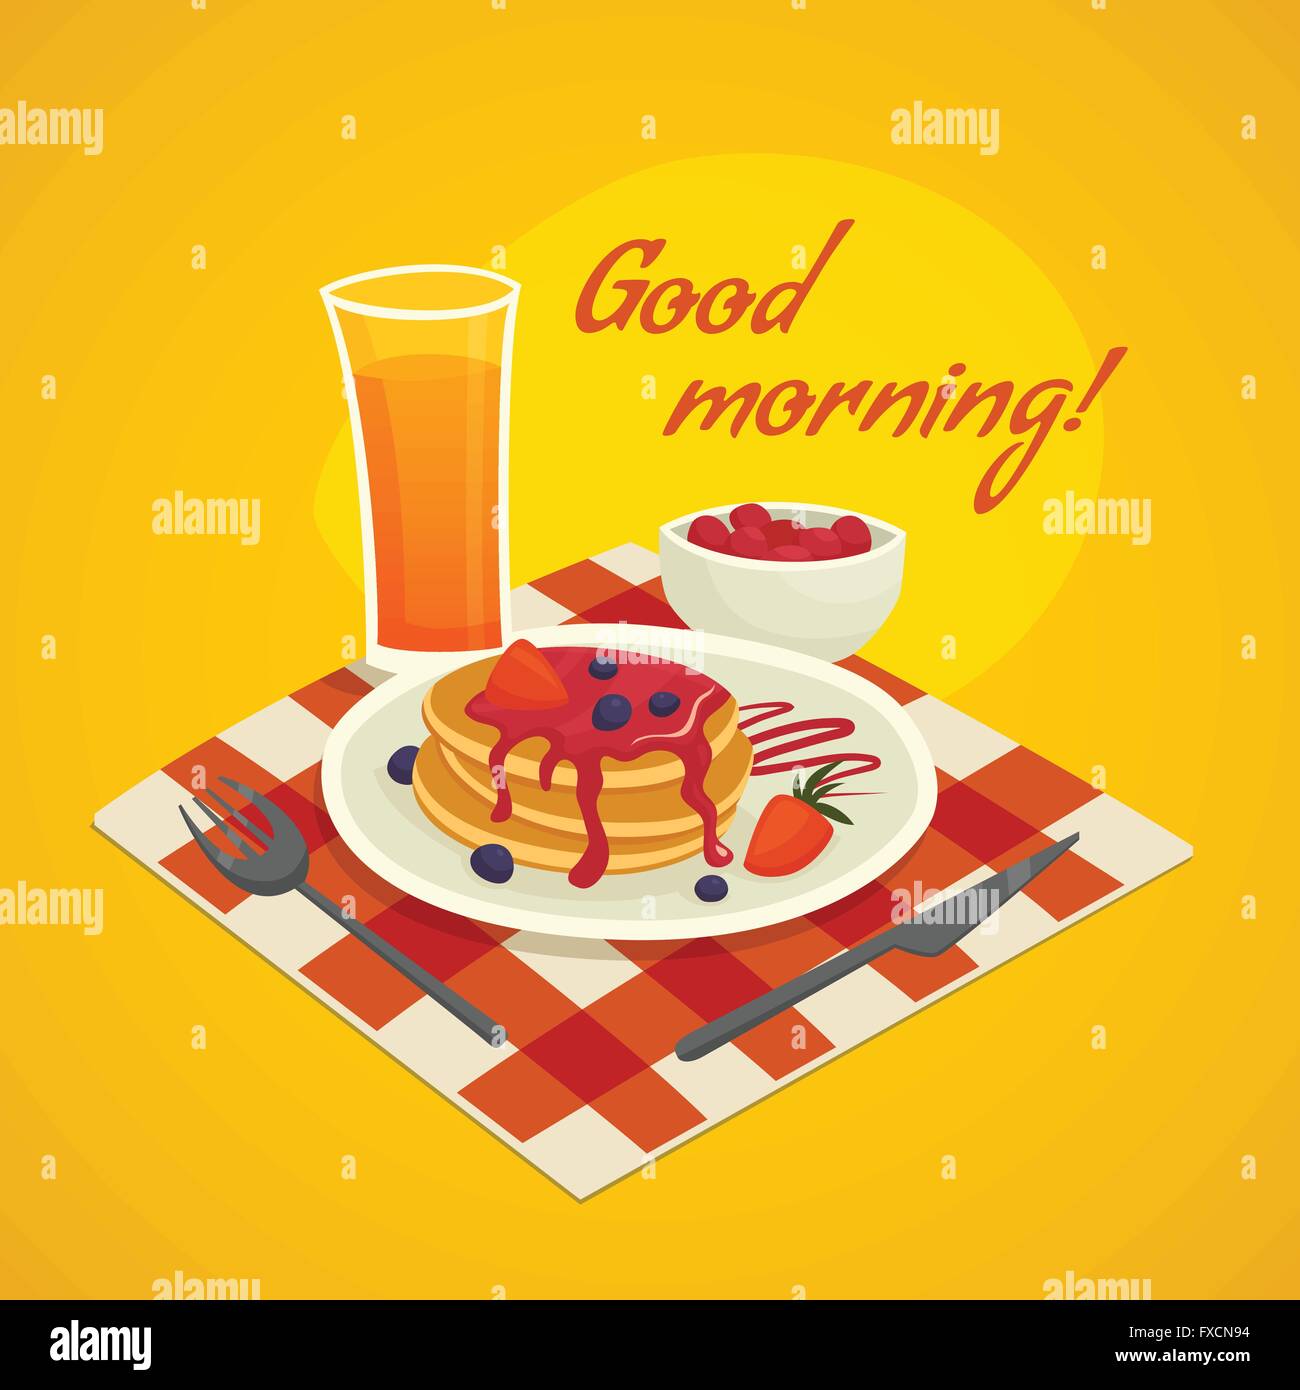 Breakfast Design Concept With Good Morning Wishing Stock Vector ...